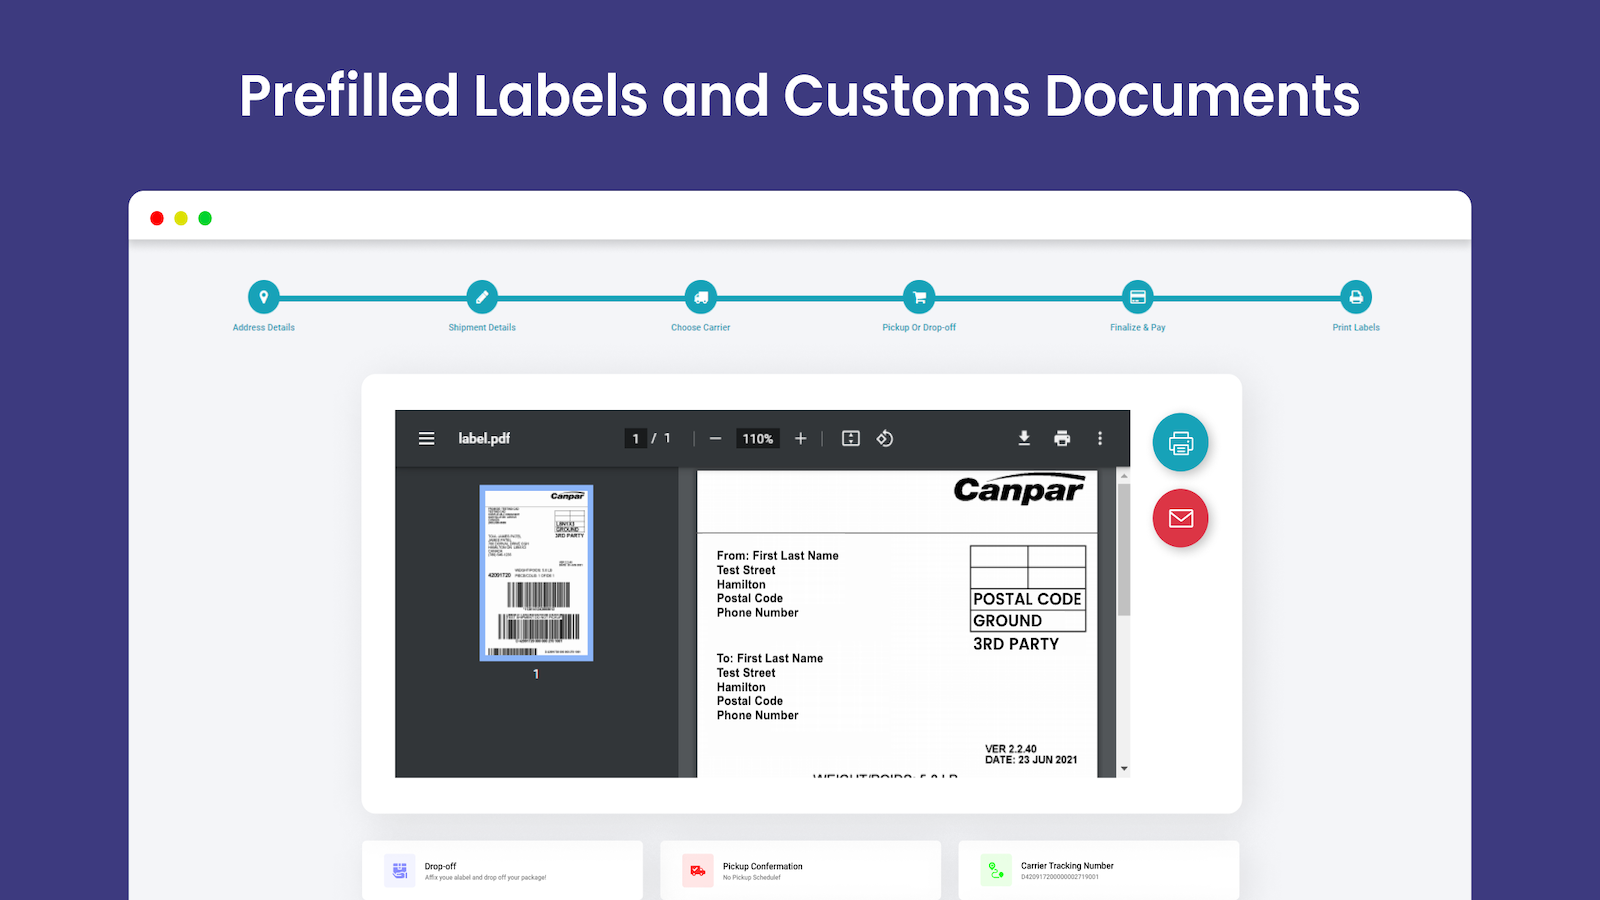 generate labels and customs documents with ease